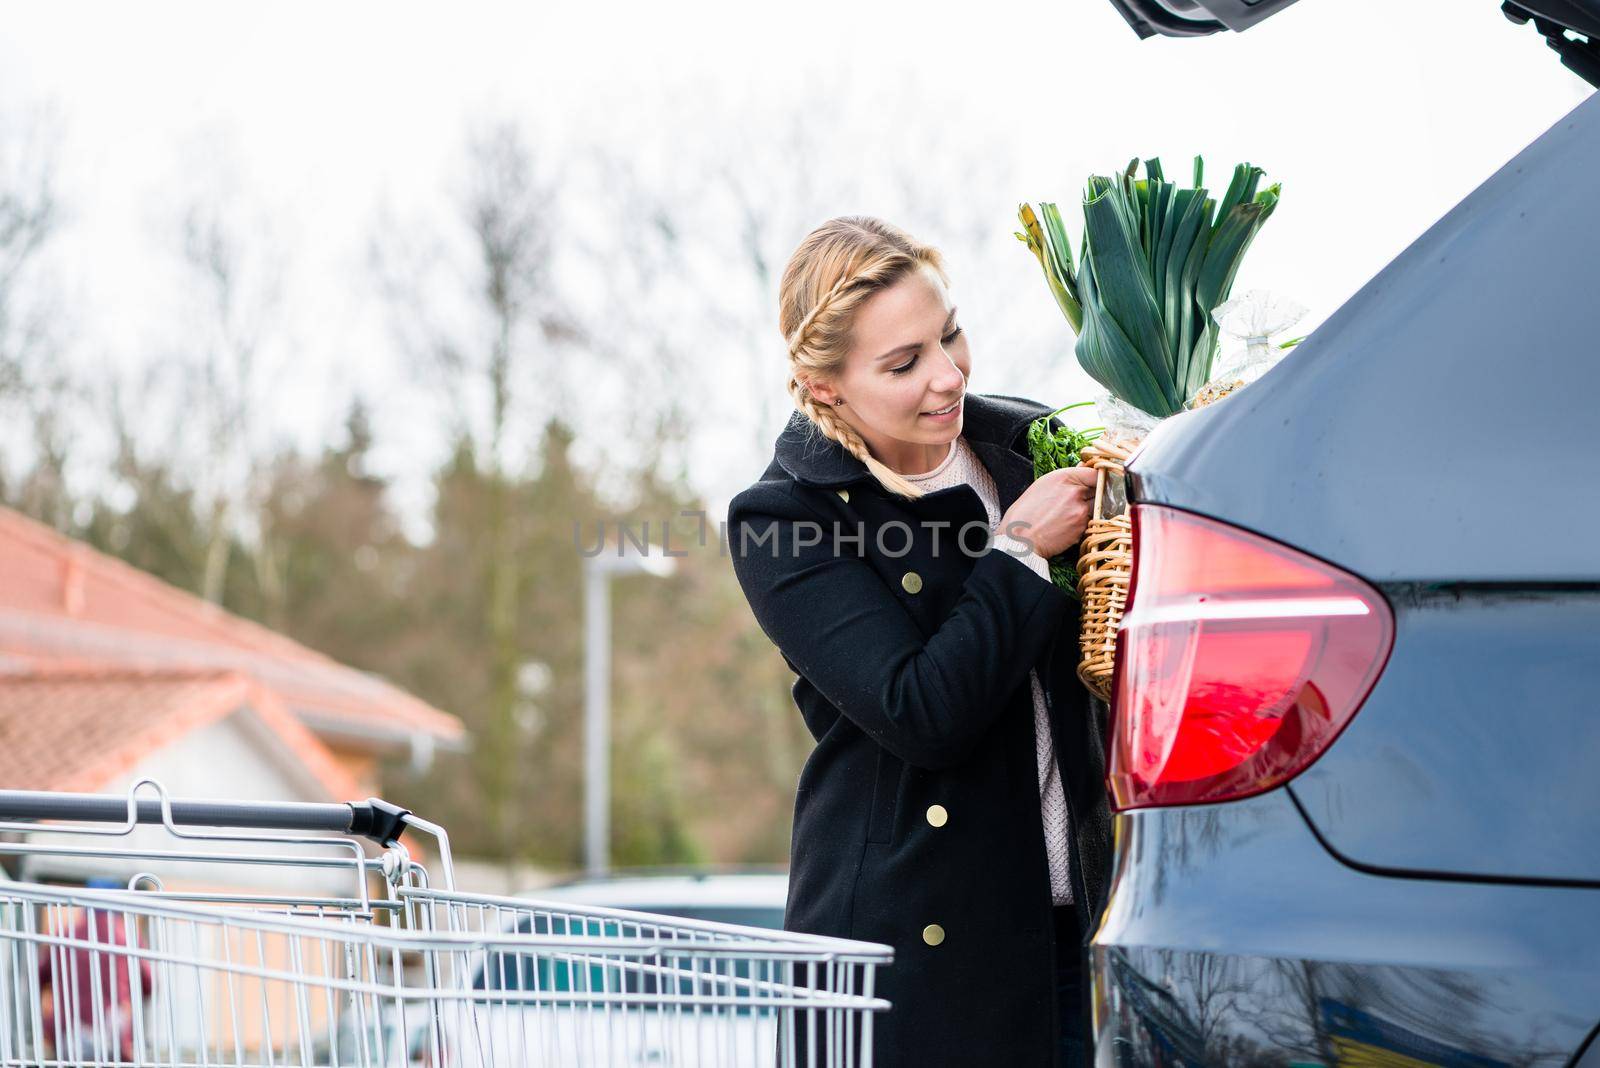 Woman loading groceries after shopping into trunk of her car by Kzenon